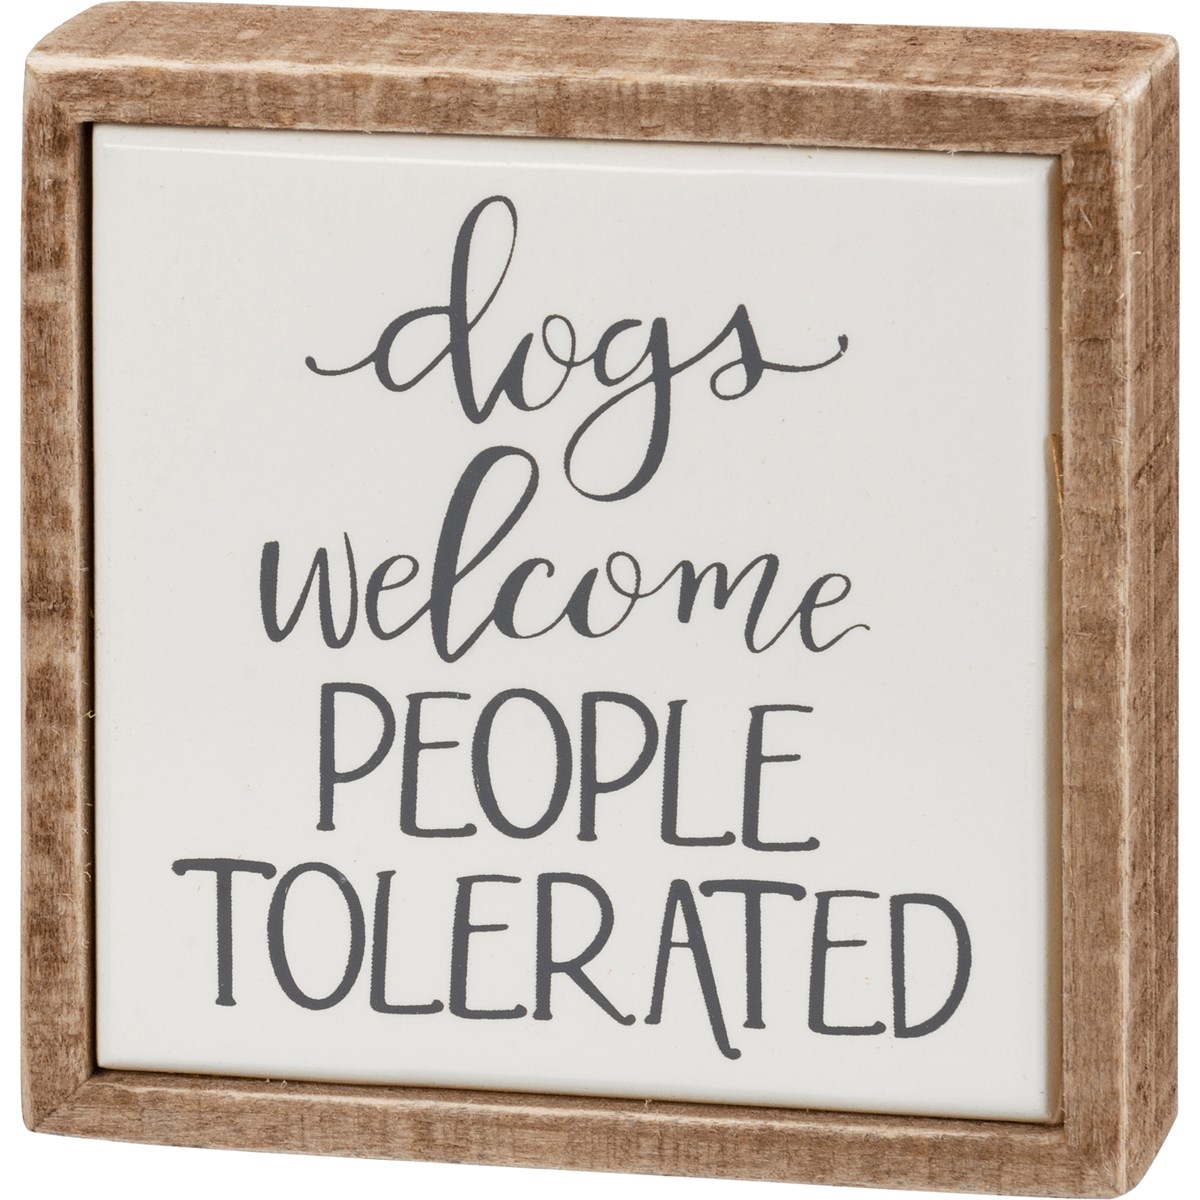 Dogs Welcome People Tolerated Box Sign Mini - Wood